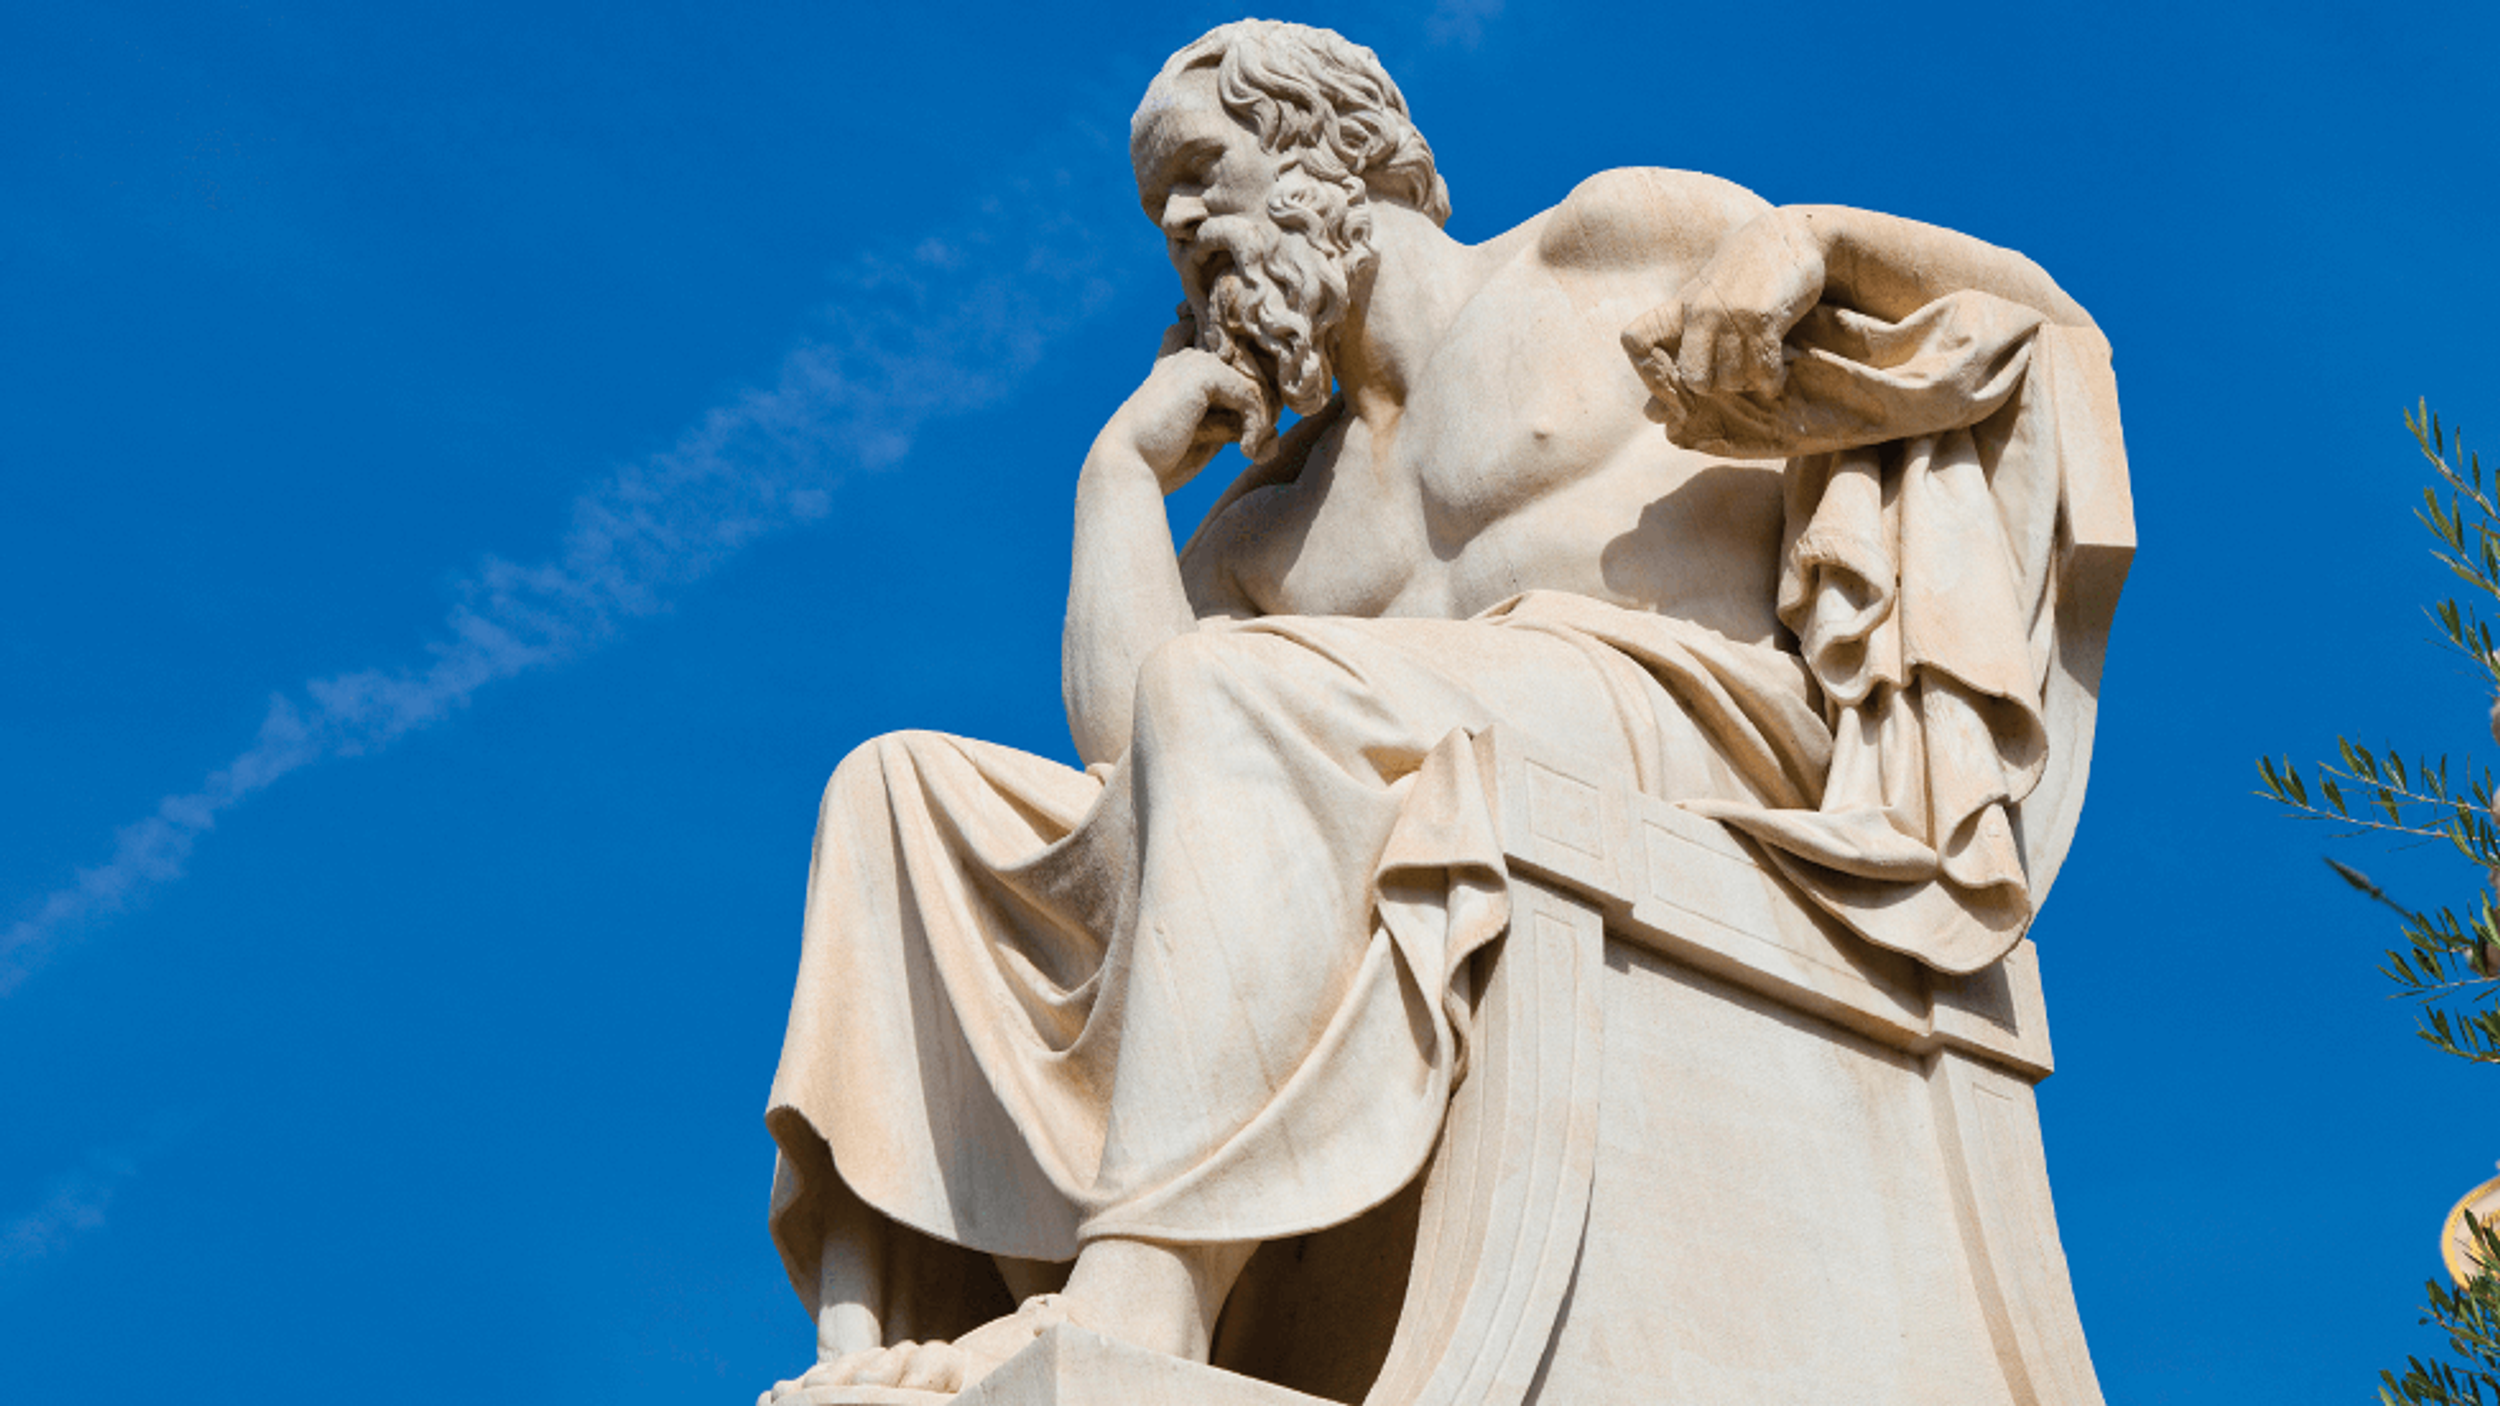 5 Reasons To Study Philosophy